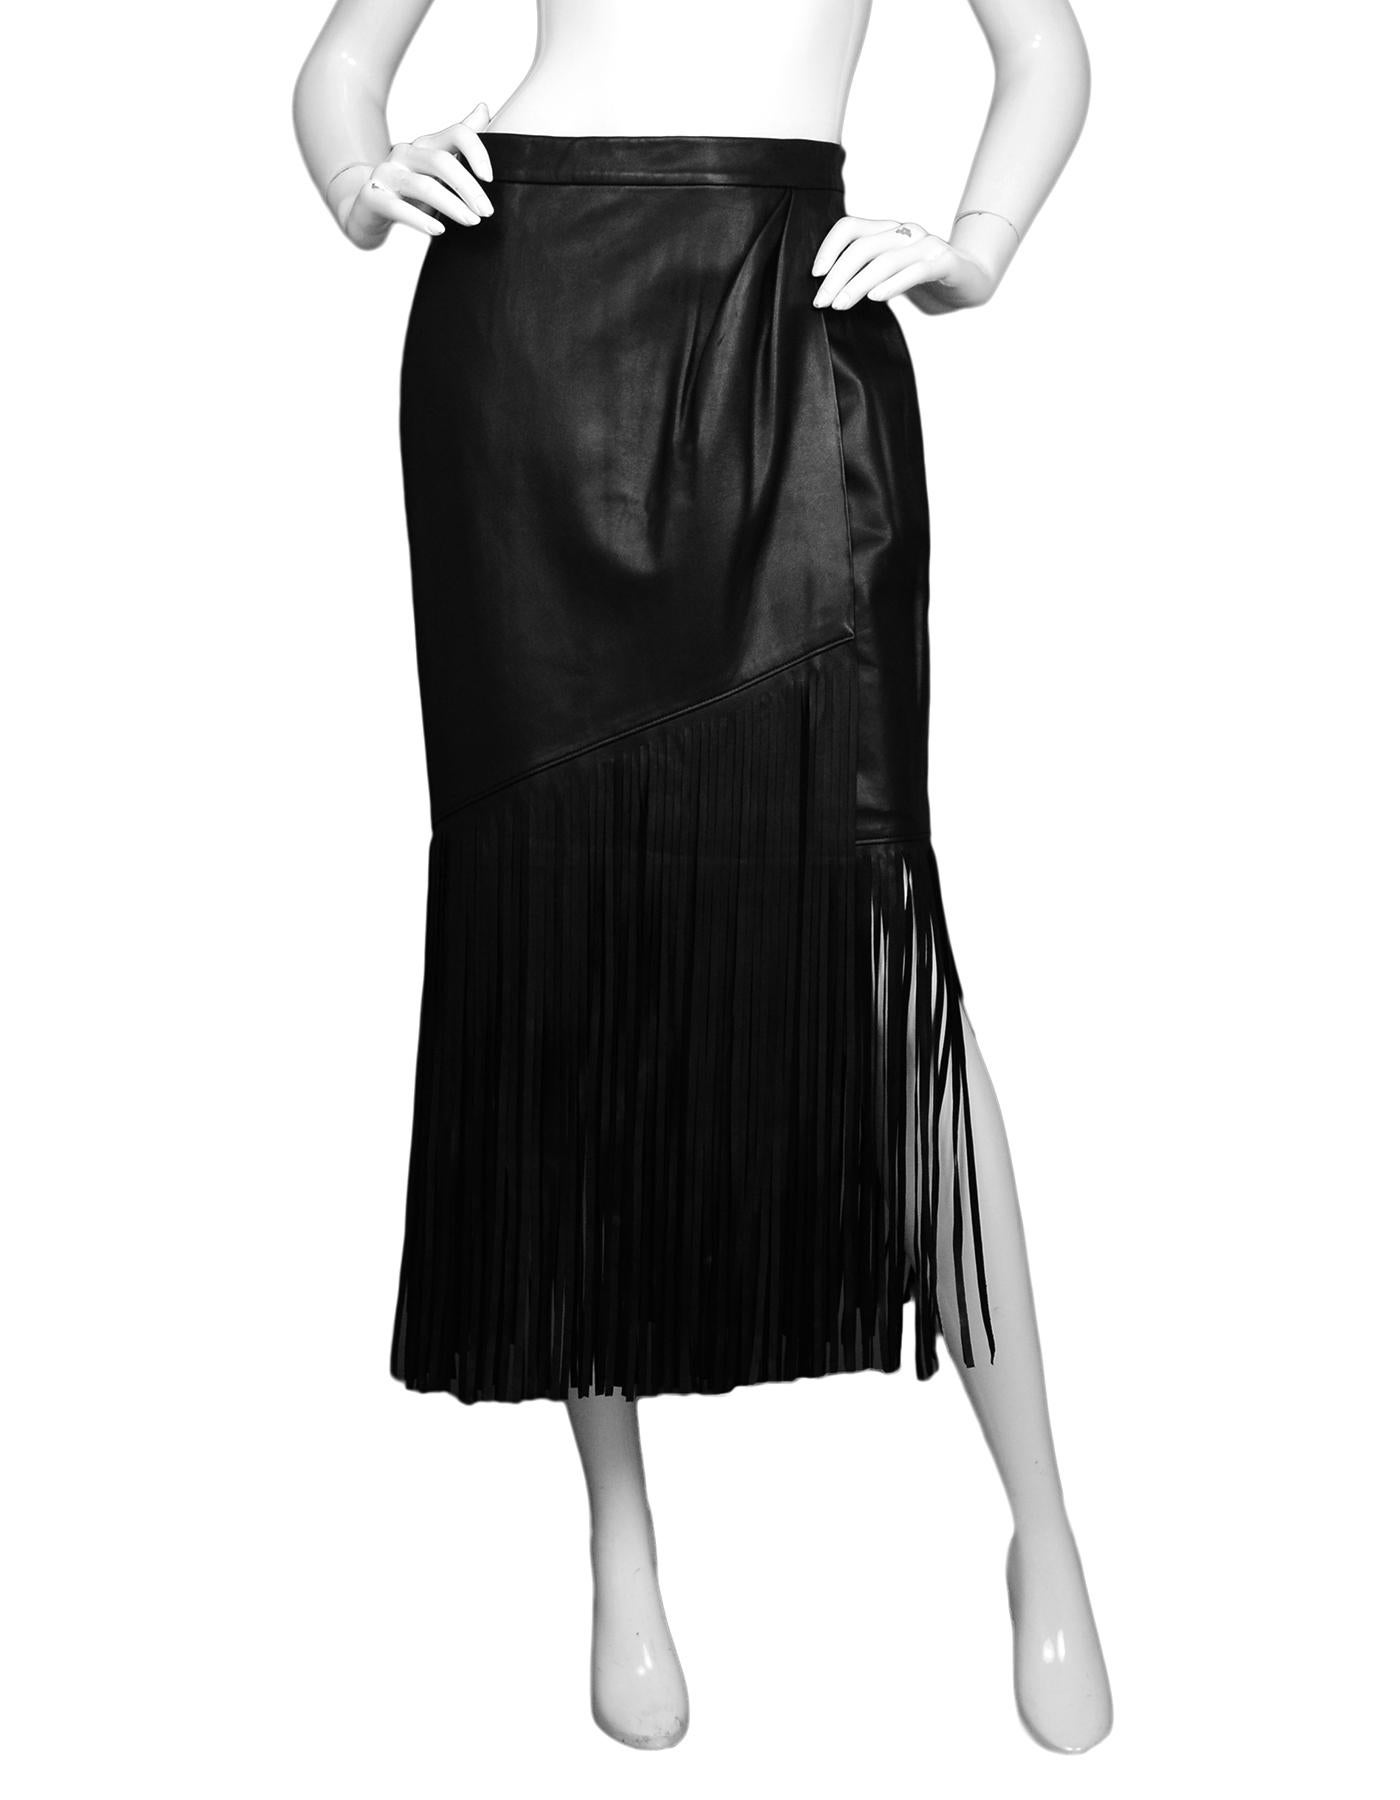 Tamara Mellon Black Leather Fringe Skirt NWT Sz 10

Made In:  China 
Color: Black
Materials: 100% real suede
Lining:  100% polyester
Closure/Opening: Hidden back zipper, with double hook and button closure at top
Overall Condition: Excellent